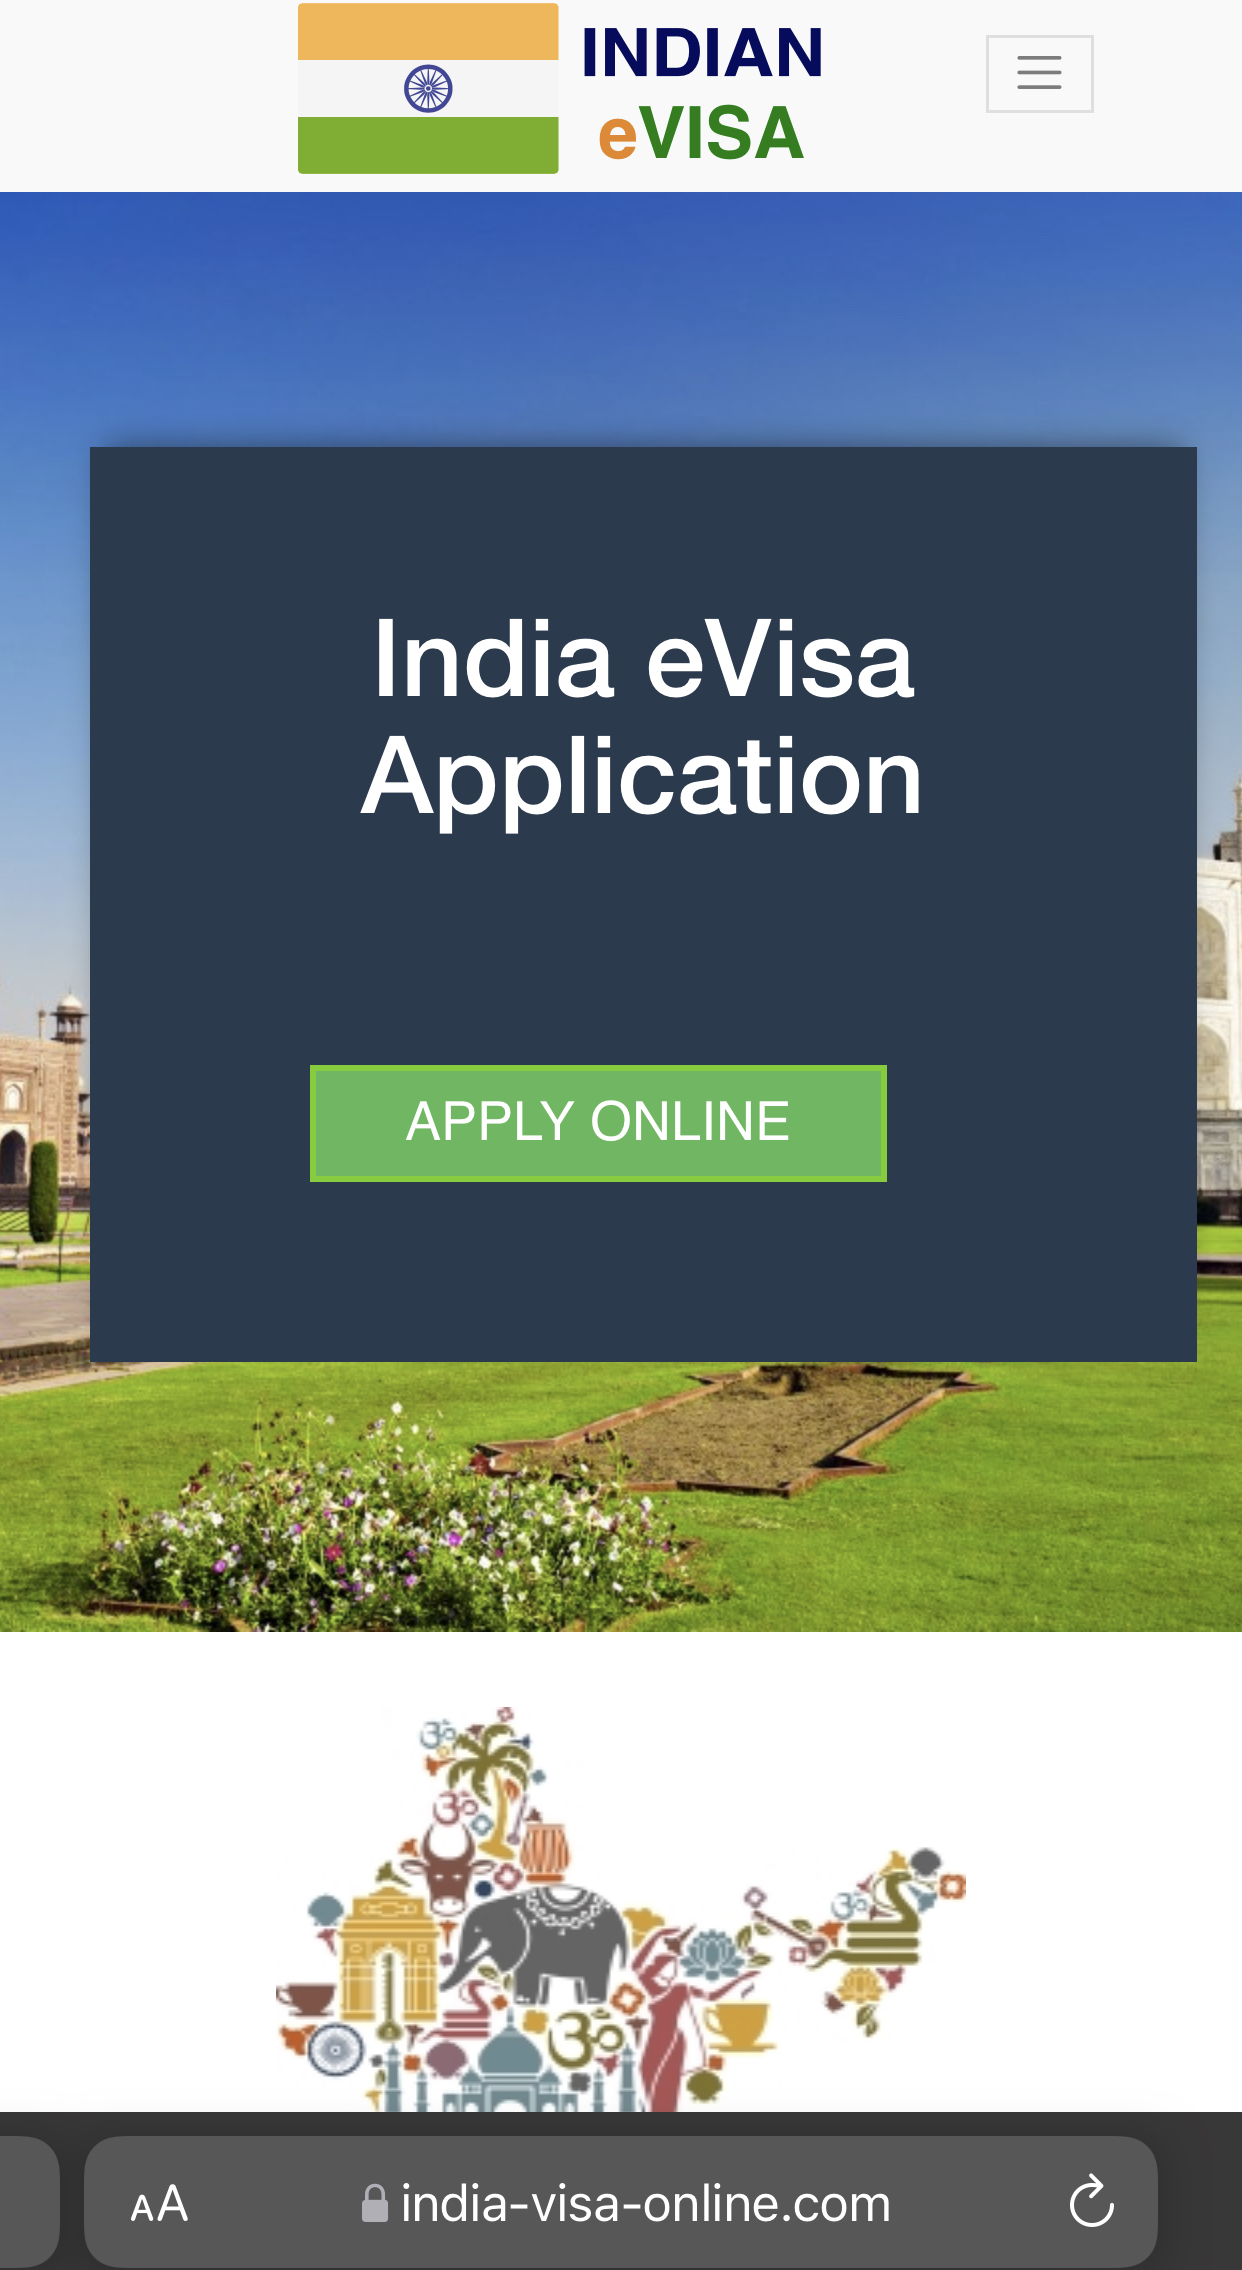 India Visa Online Extend Their Services To More Countries